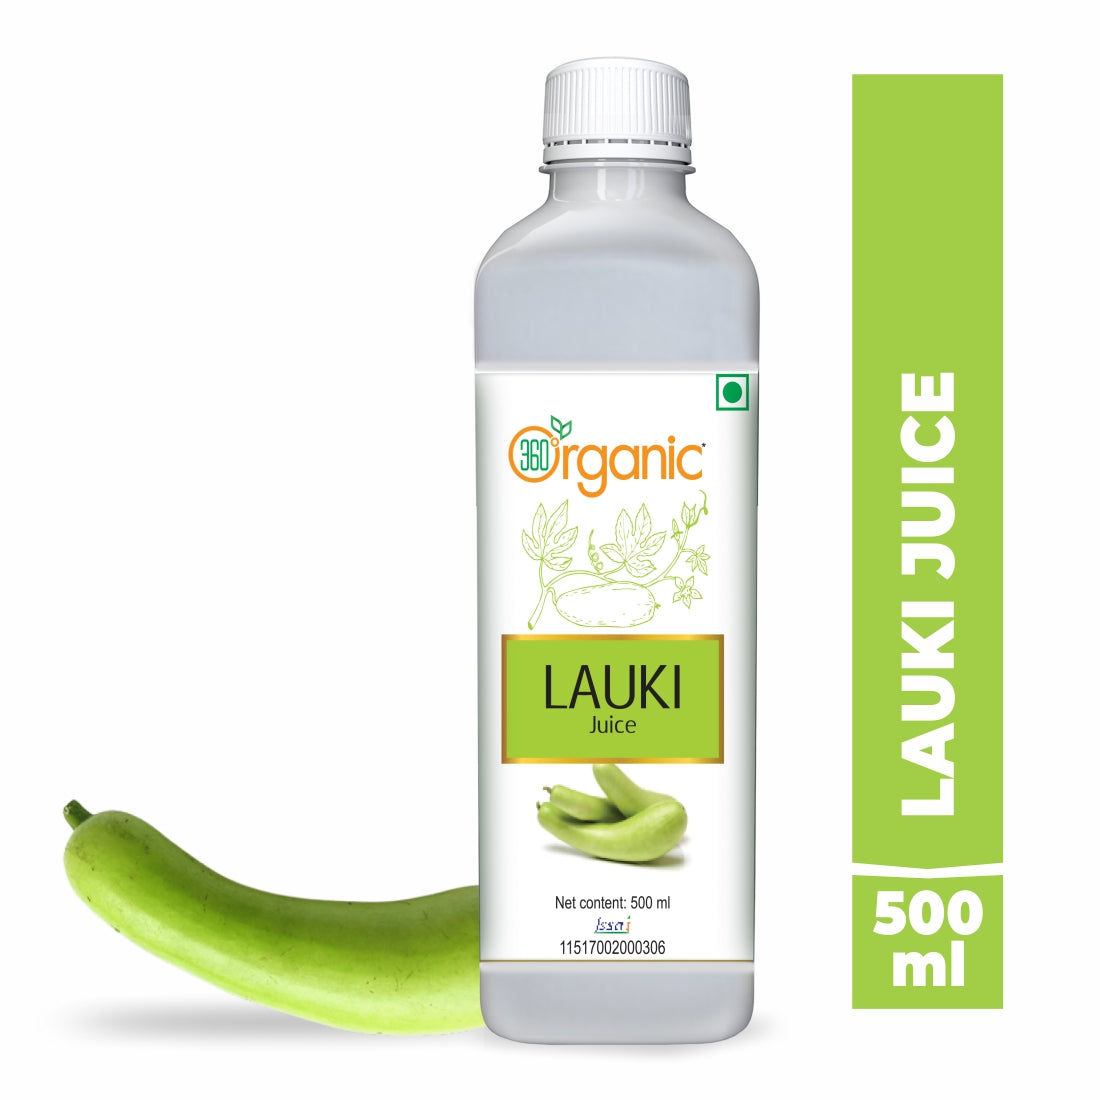 360 Degree Organic Lauki Juice (Bottle Gourd Juice) for Help Detoxify the Liver, Cleanse the Digestive System, and Purify Blood- 500 ml